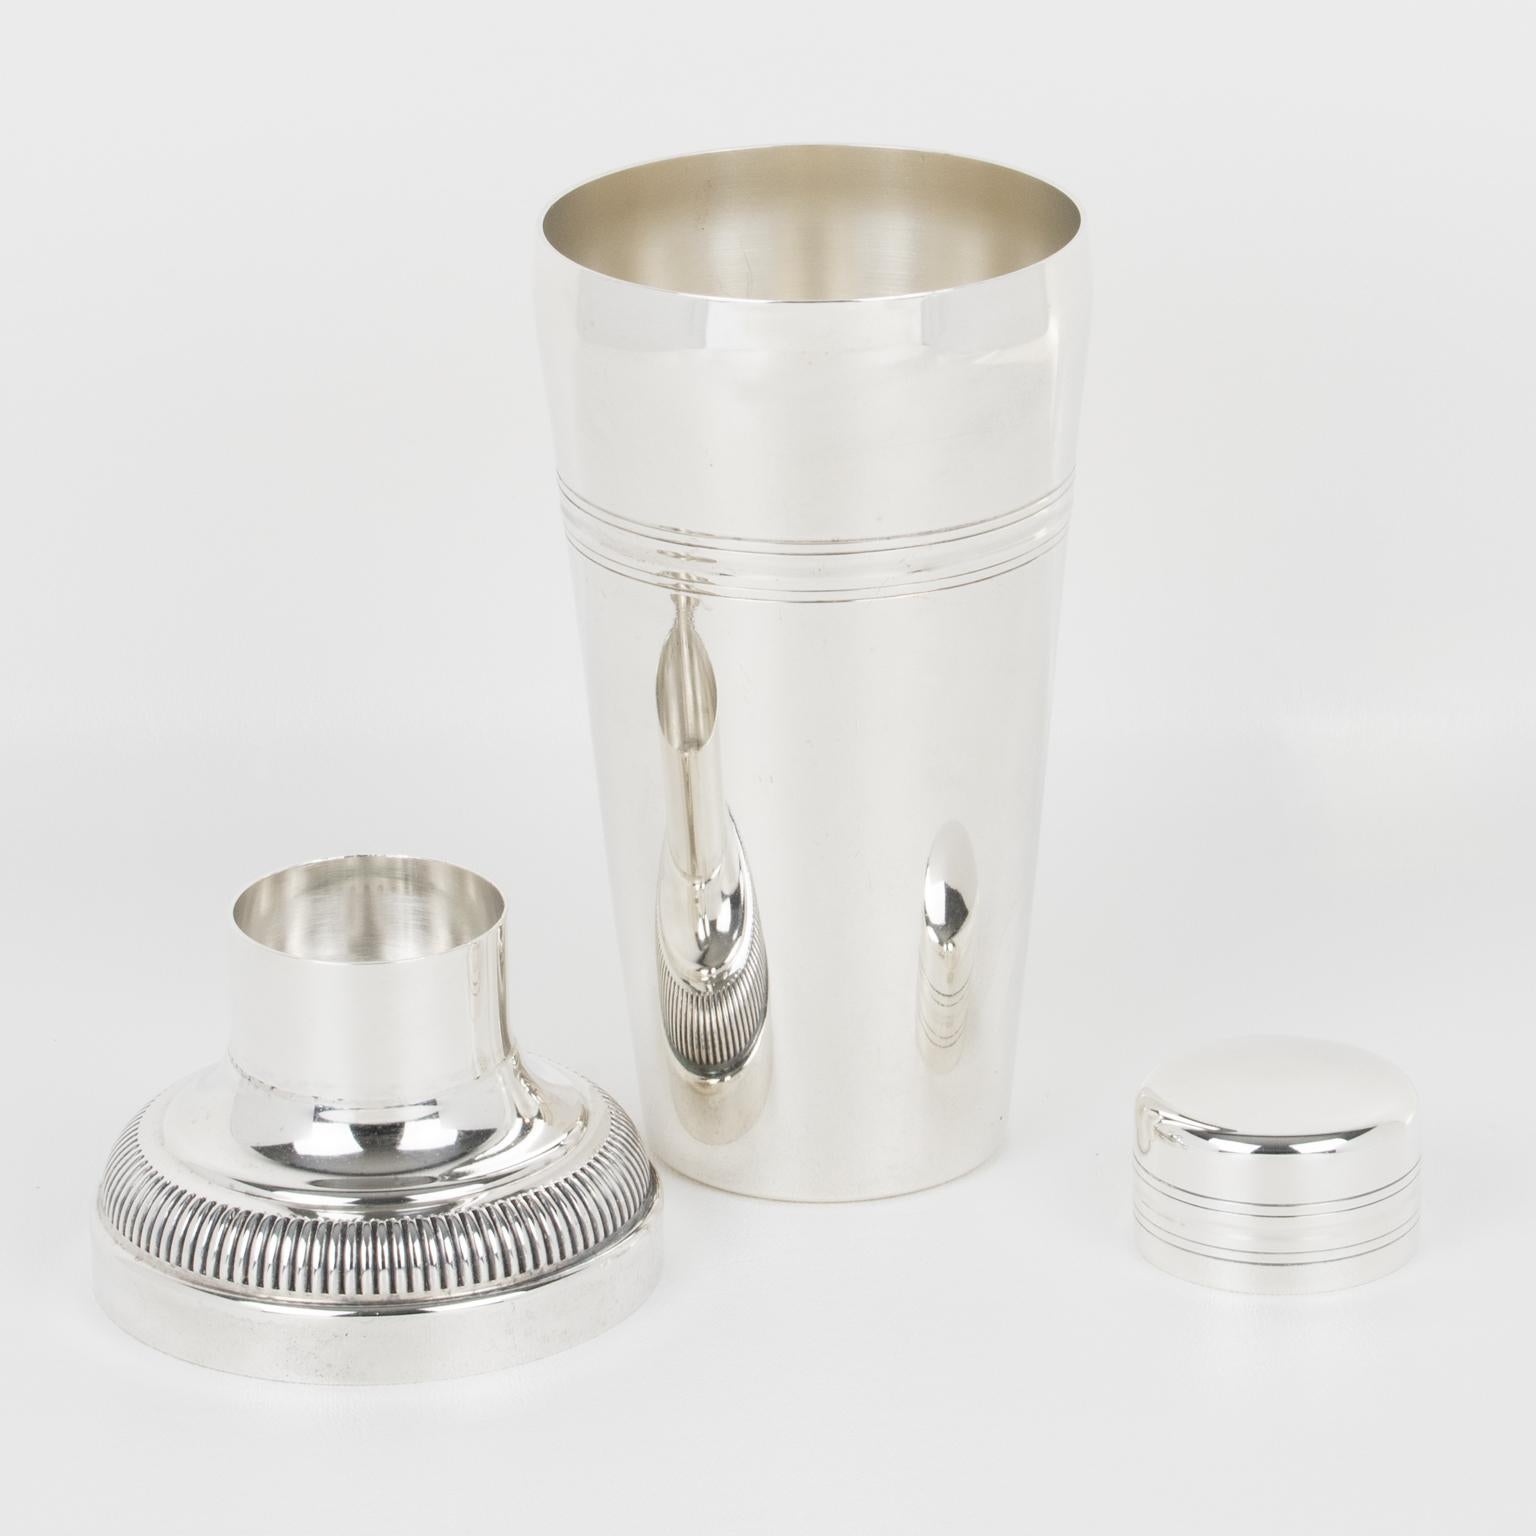 This fabulous French Art Deco silver plate cylindrical cocktail or Martini shaker was crafted by silversmith Gelb, Paris, in the 1940s. The three-sectioned cocktail shaker has a removable cap and filter strainer. The piece boasts a lovely geometric